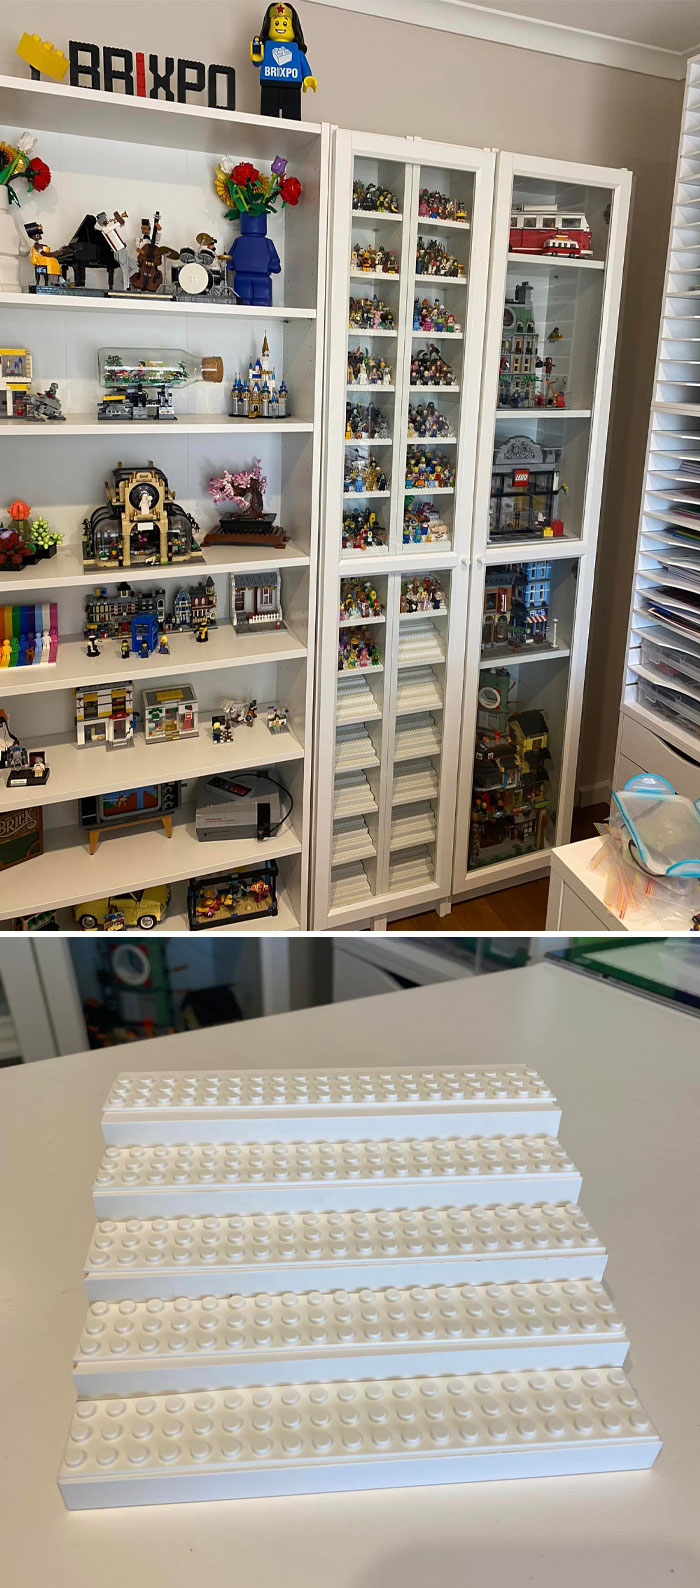 I'm known as Afol (a grown-up LEGO fan) and I came up with a hack for IKEA's LEGO minifigures